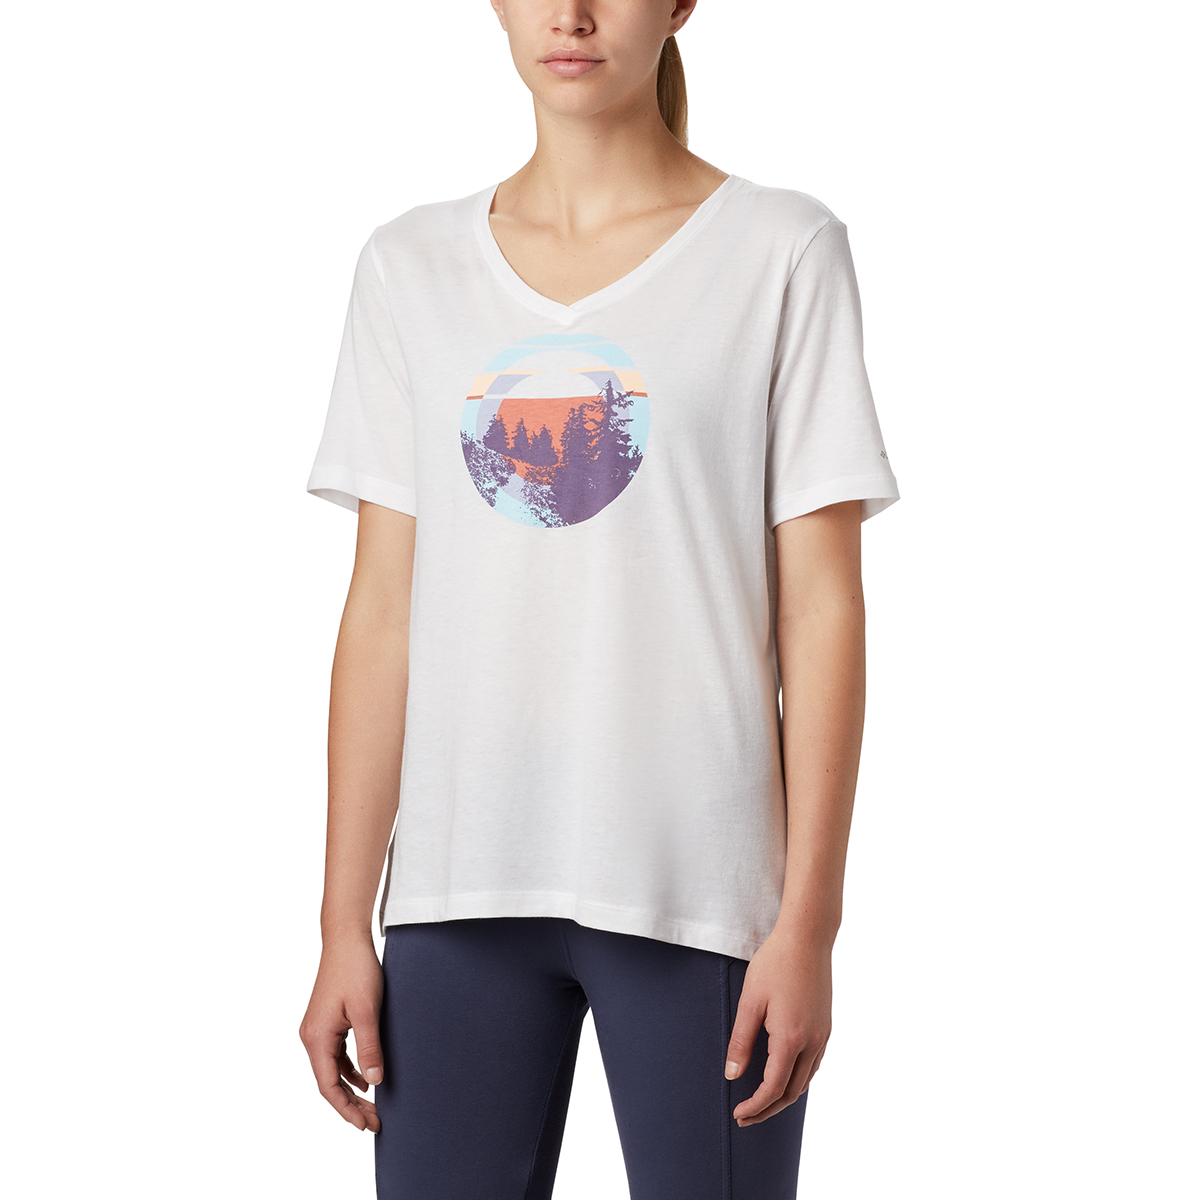 Columbia Women's Short-Sleeve Mount Rose Relaxed Tee - White, S